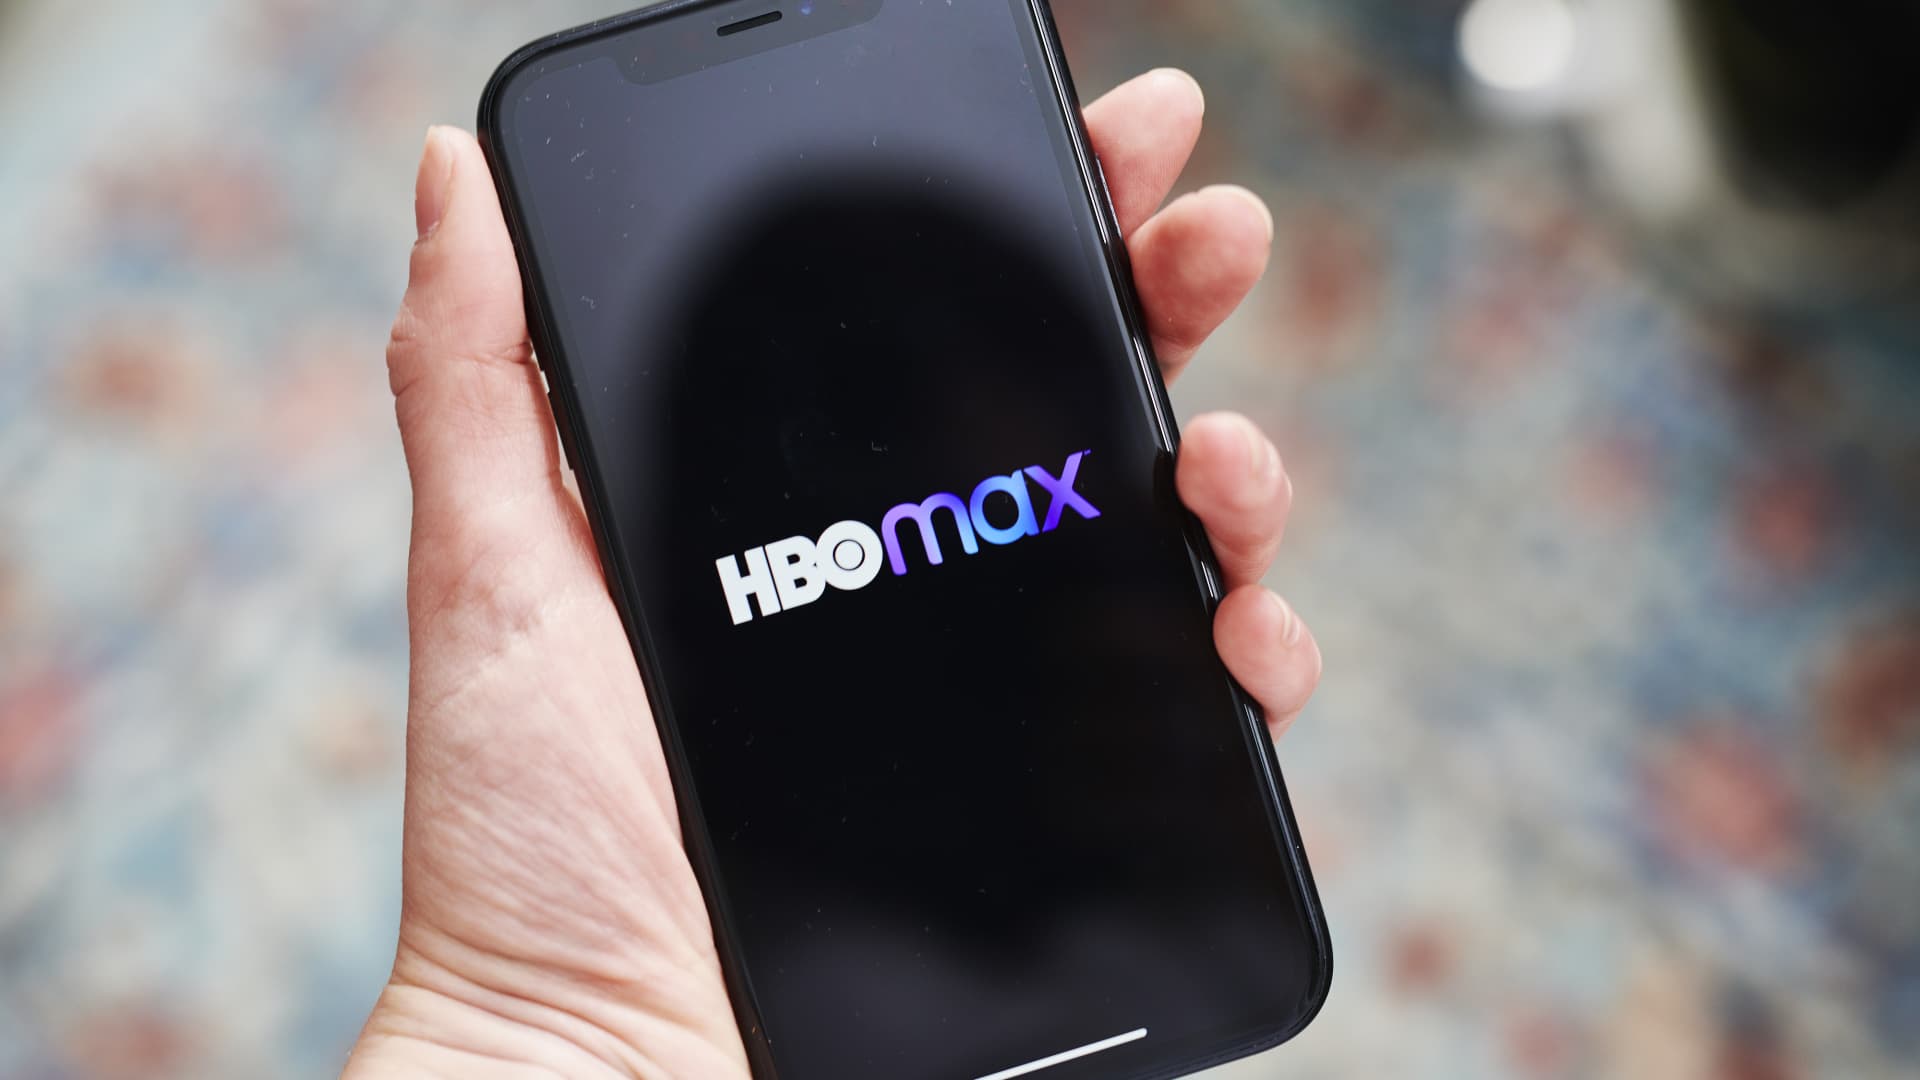 Signage for the AT&T Inc. WarnerMedia HBO Max streaming service is displayed on a smartphone in an arranged photograph taken in the Brooklyn Borough of New York, U.S., on Thursday, May 28, 2020.